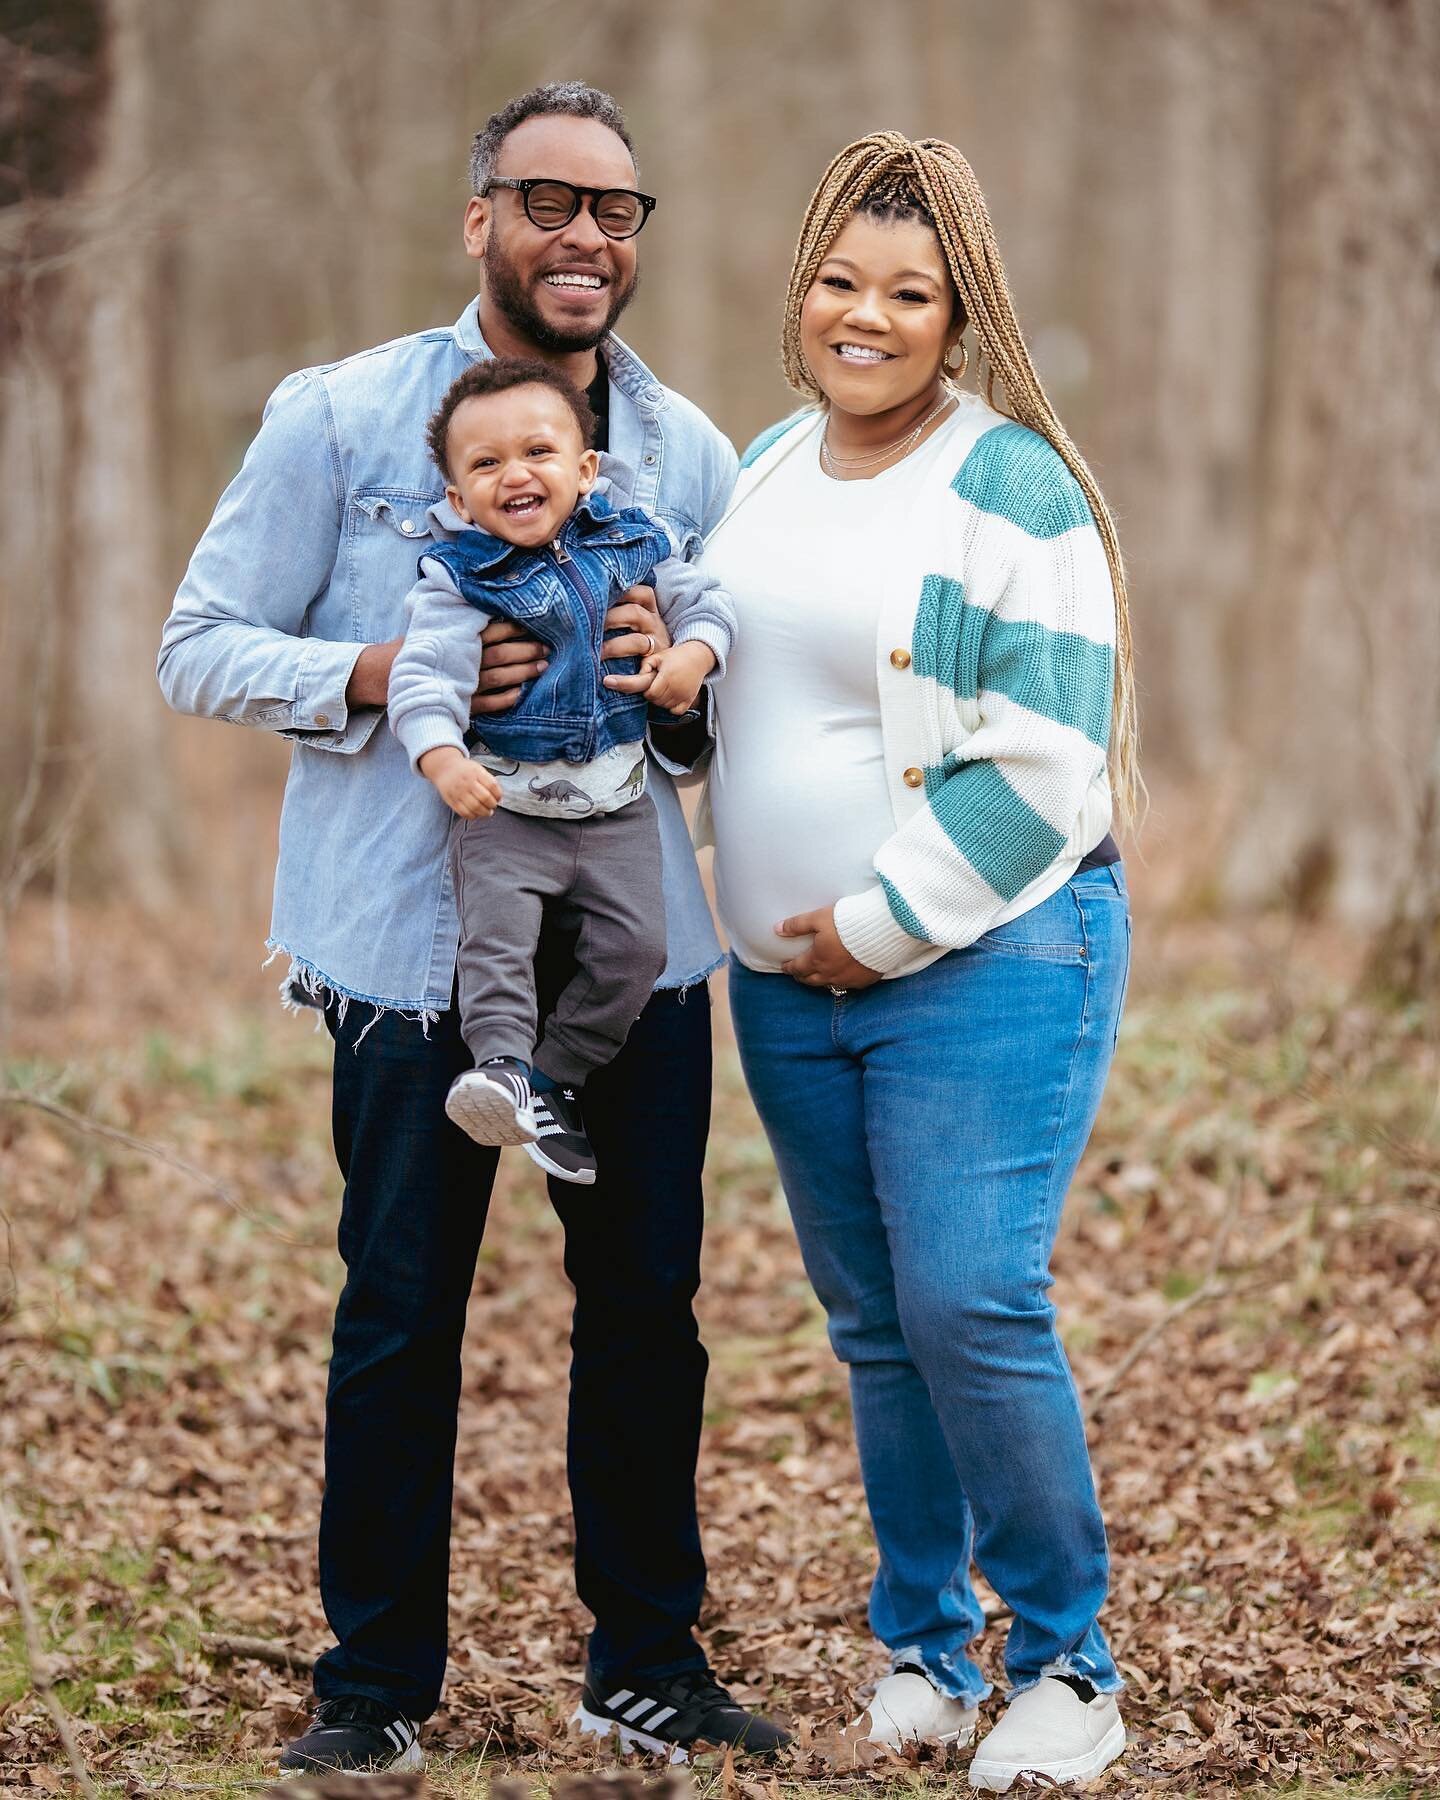 To my mom, thank you for being the example. To my husband, thank you for being my partner. To my son, thank you for making me a mother. To myself, I love you, you are a gift to the world, you are a WONDER. #mothersday #blackmotherhood